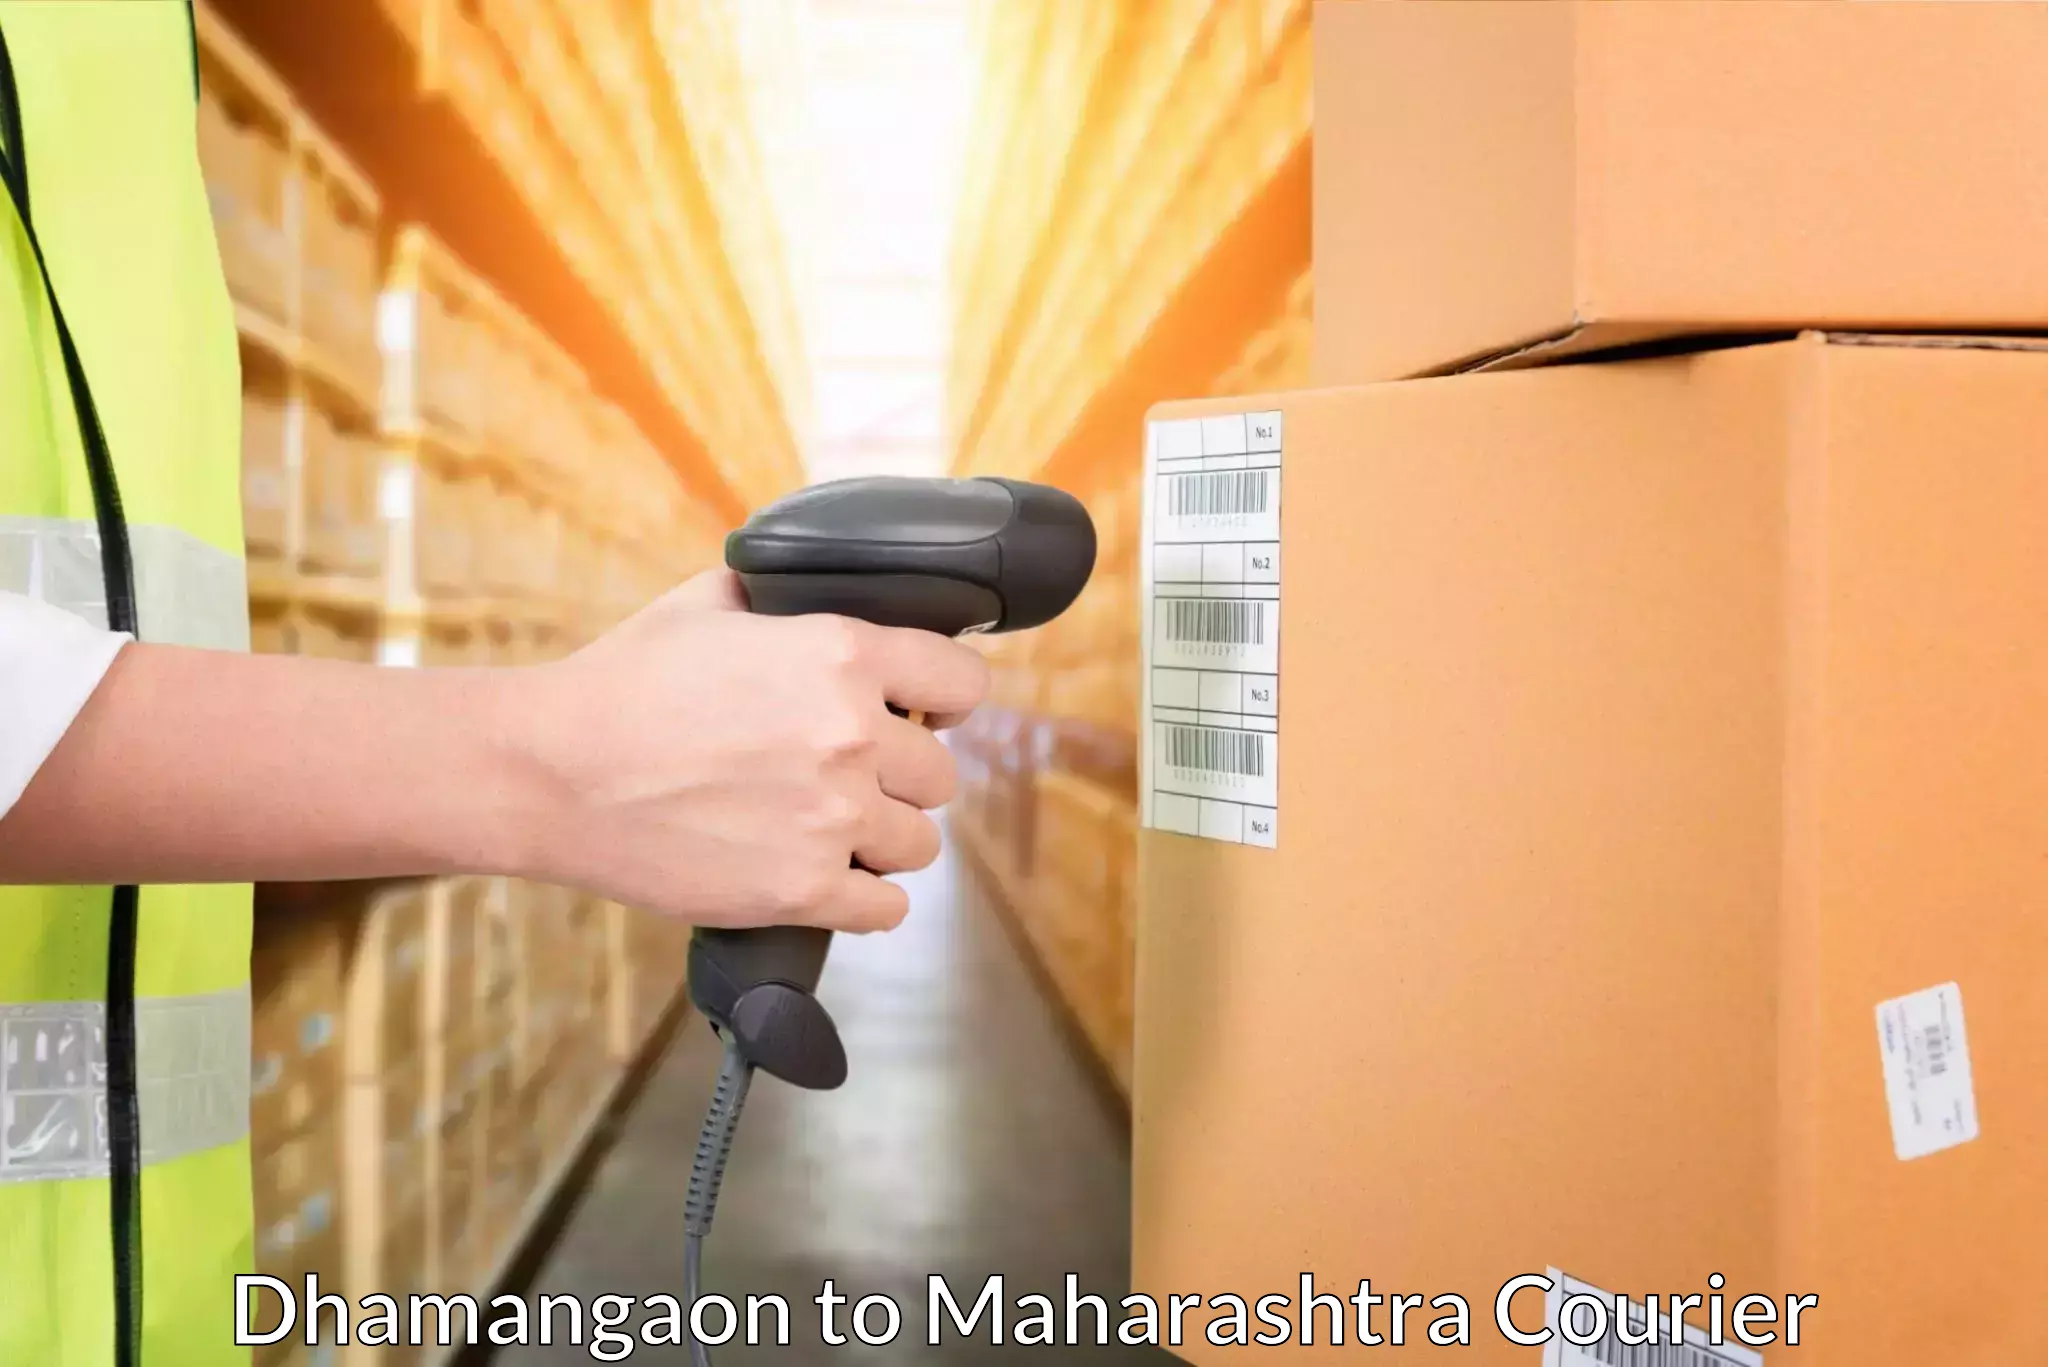 Reliable parcel services Dhamangaon to Pune